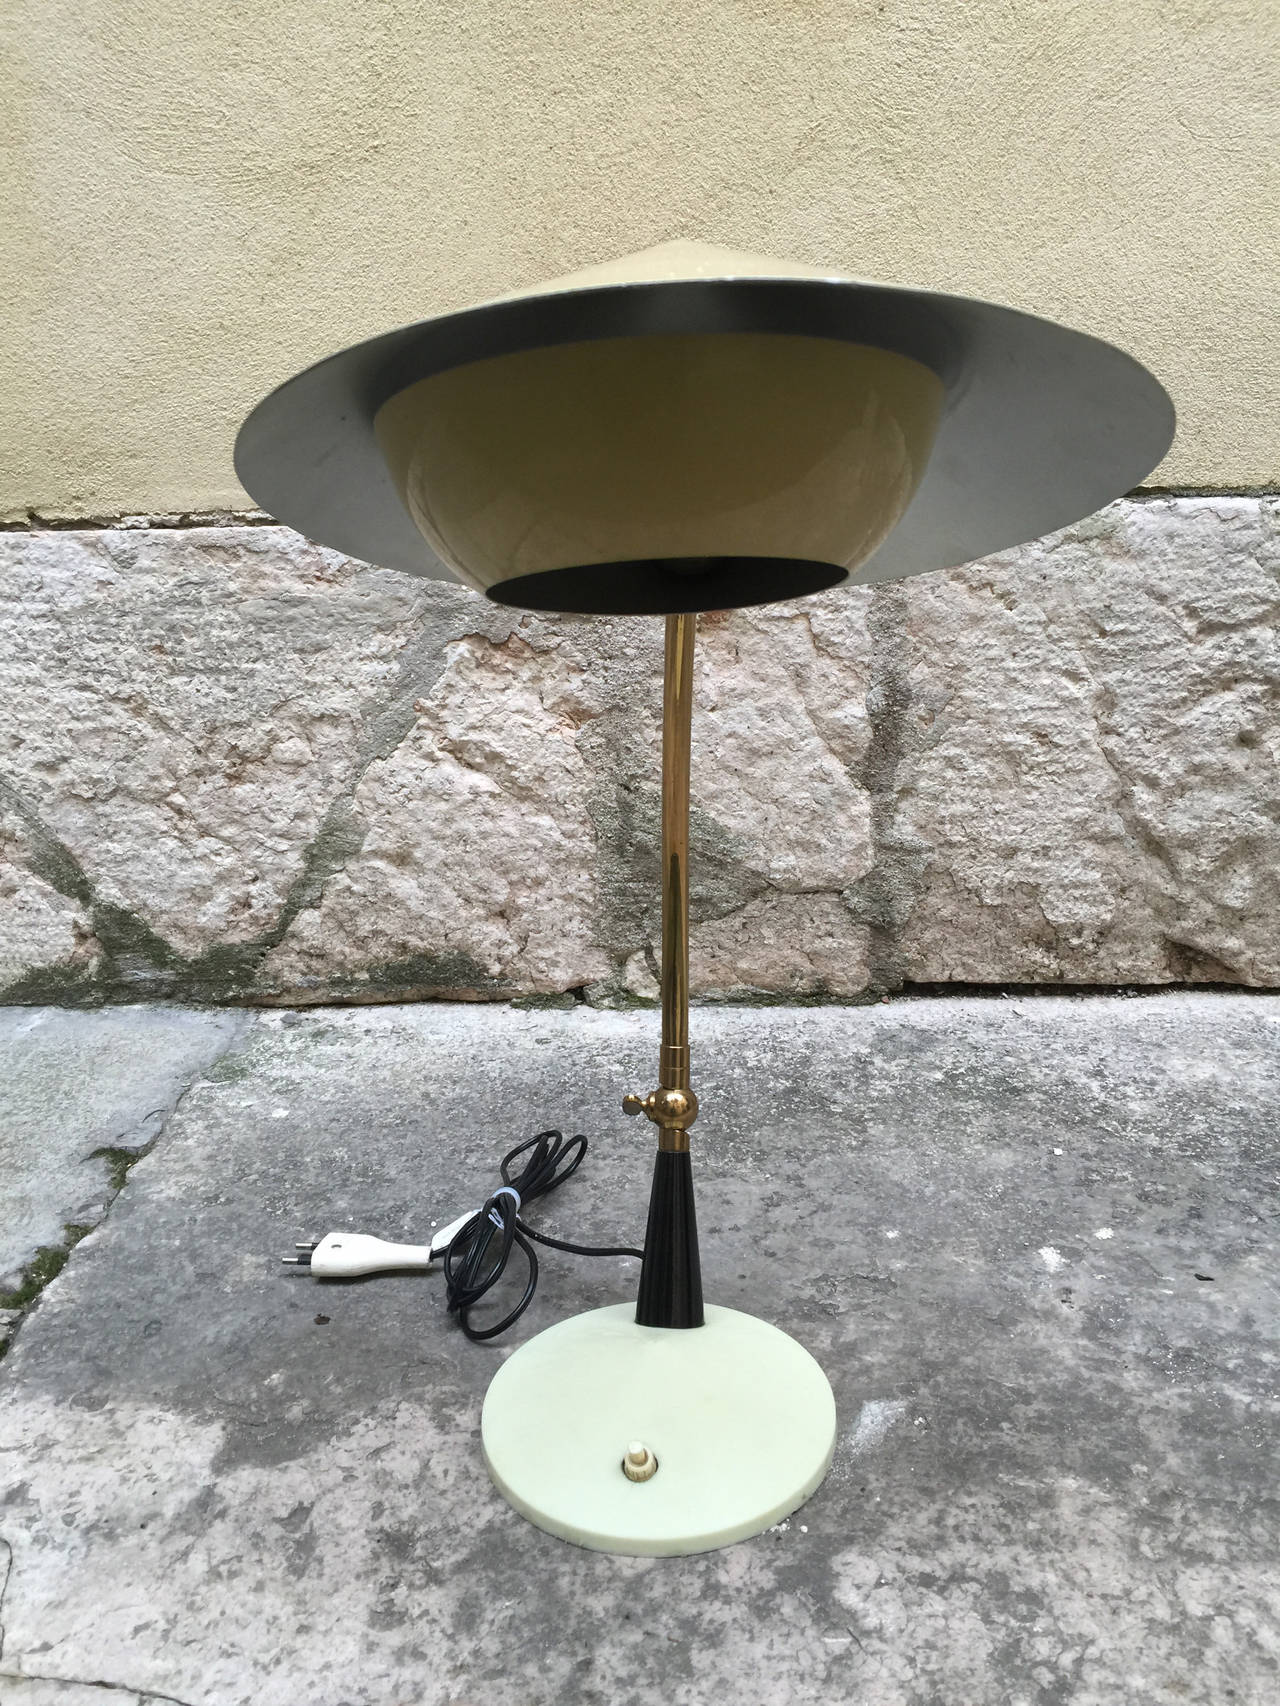 Table lamp, design Stilnovo, 1950, in perfefette conditions, directional shade, brass rod swivel, brass and painted metal frame, original colors, detail in wood,